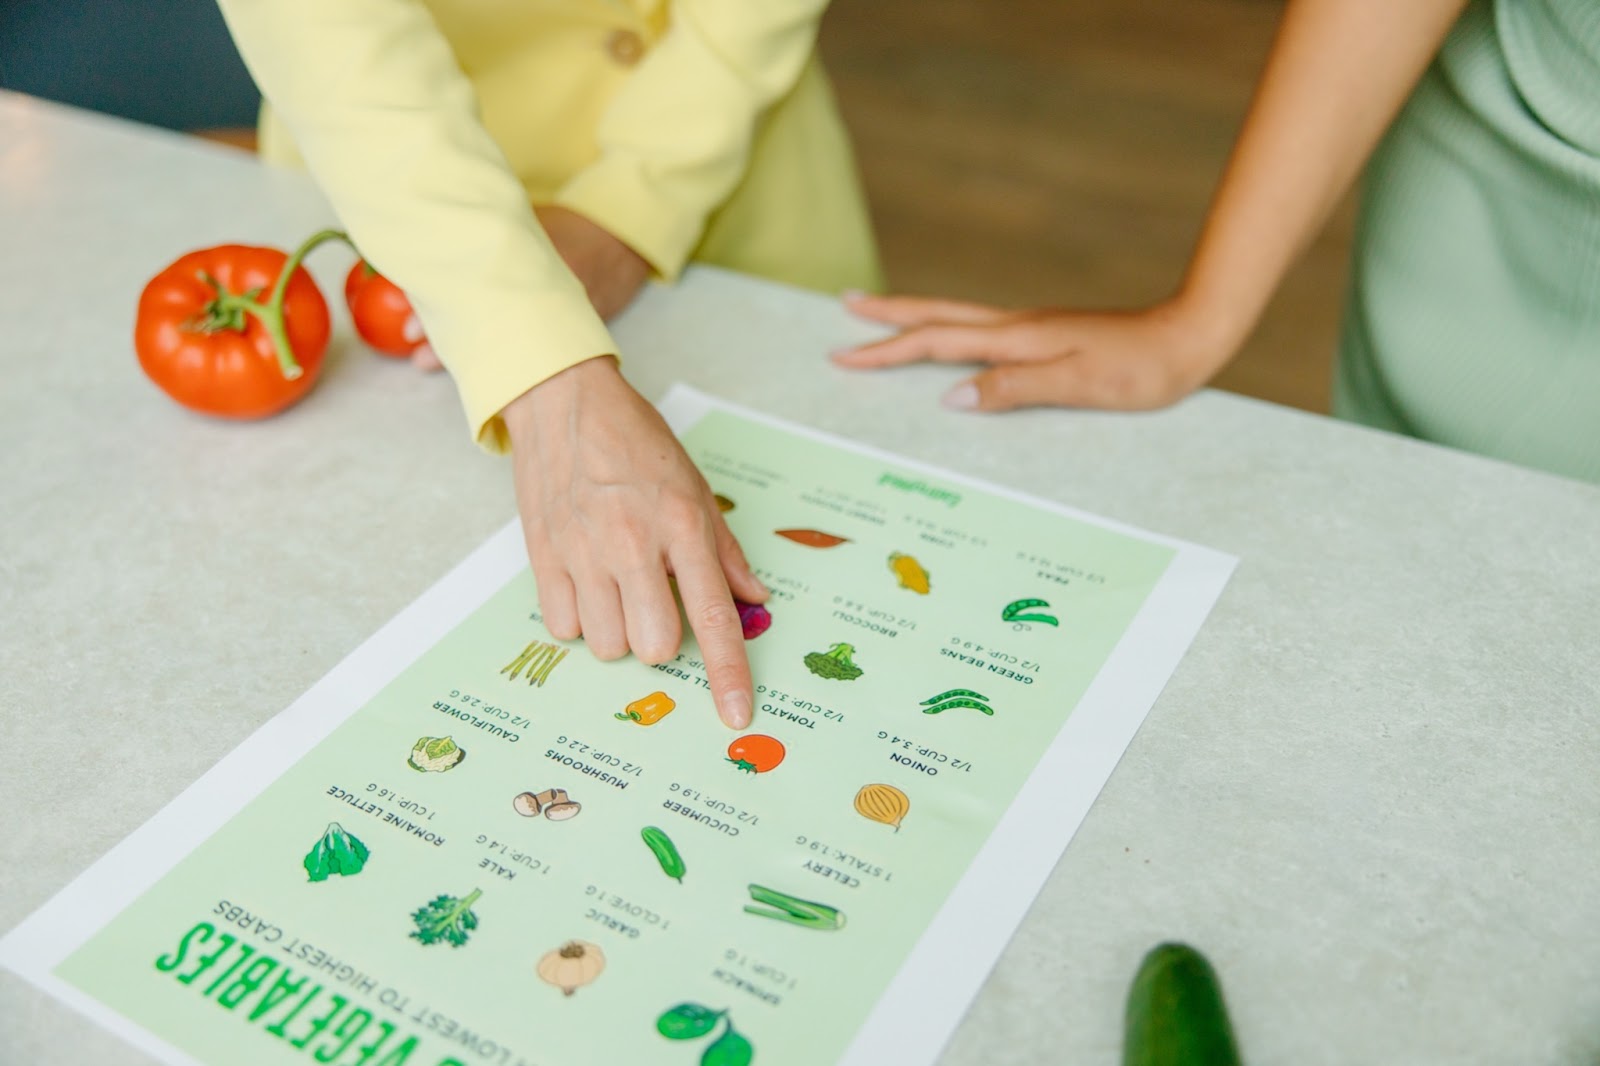 nutritionist with a chart on vegetables